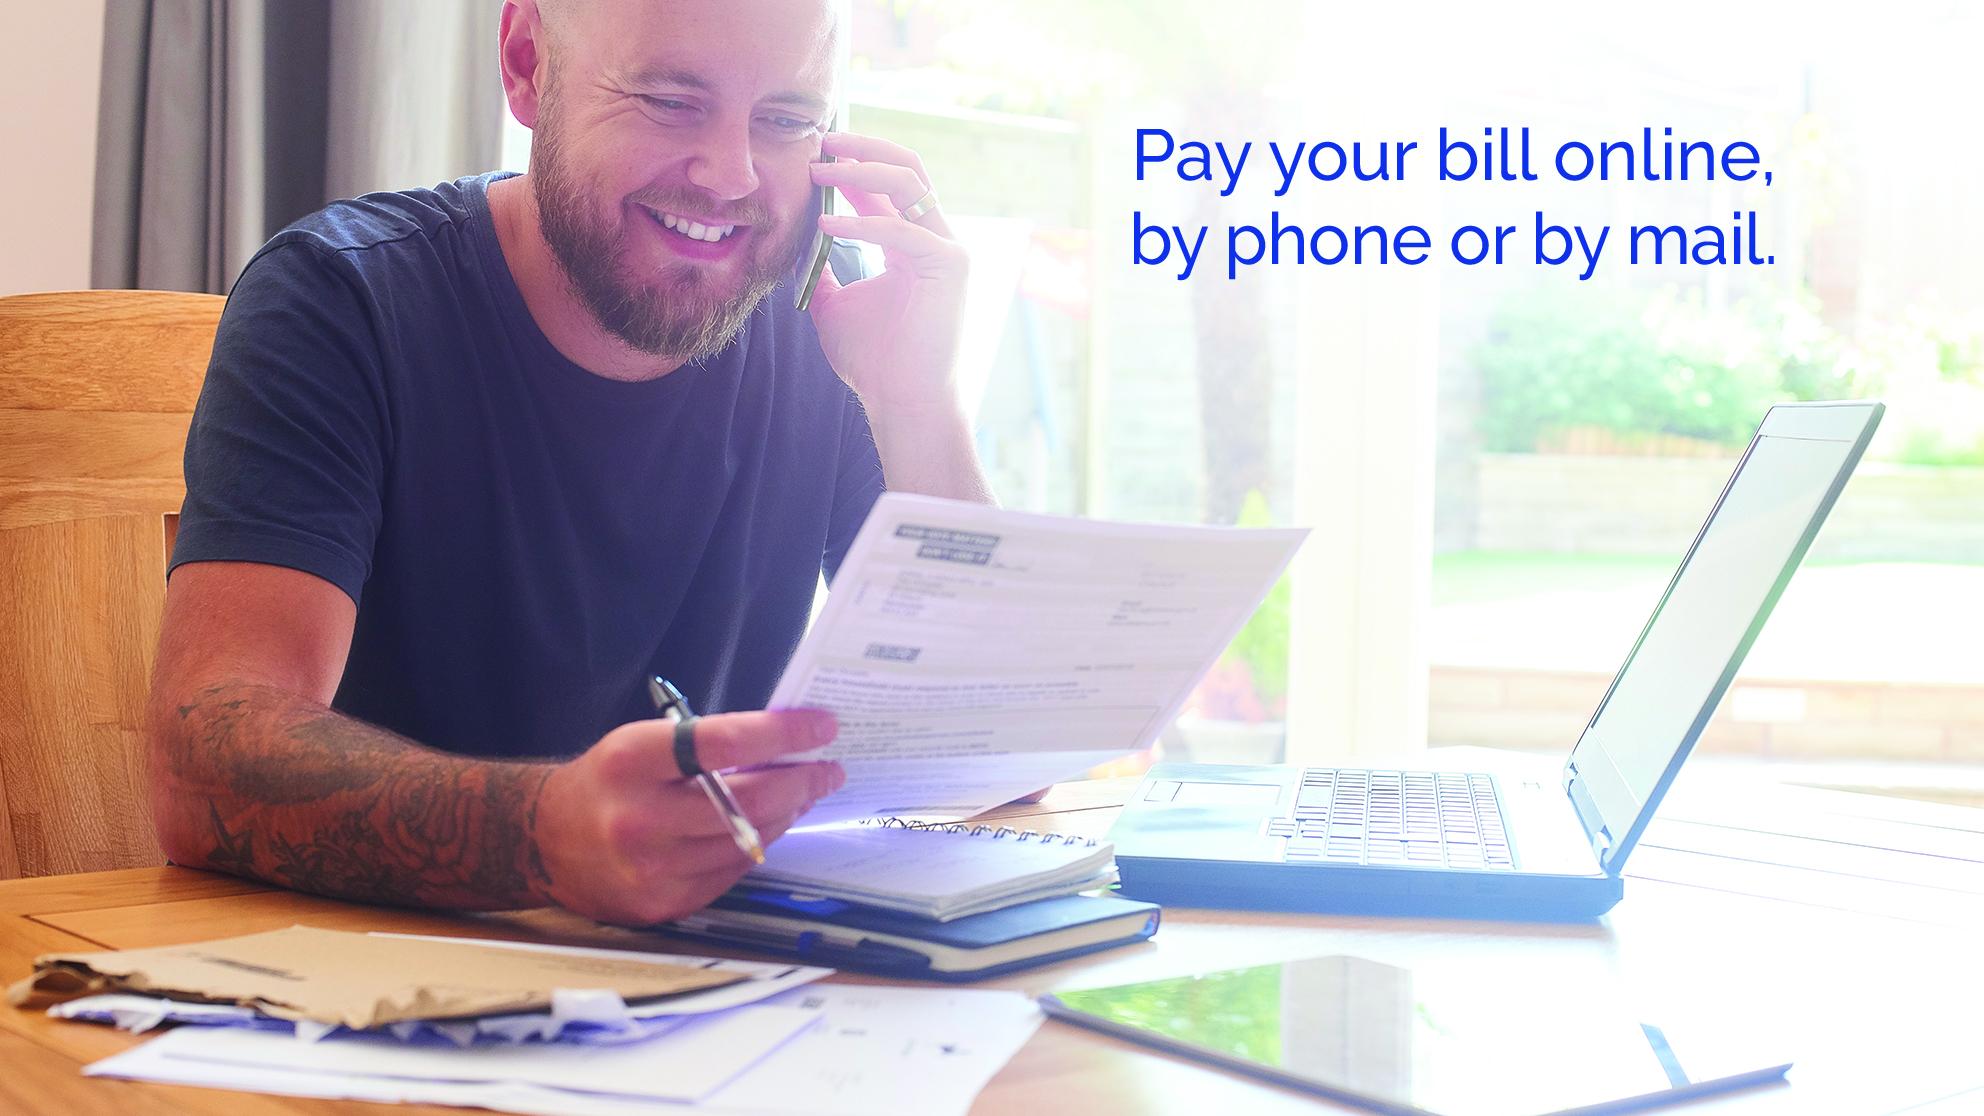 Man looking at his bill on the phone by the computer - Pay your bill online, by phone or by mail. 